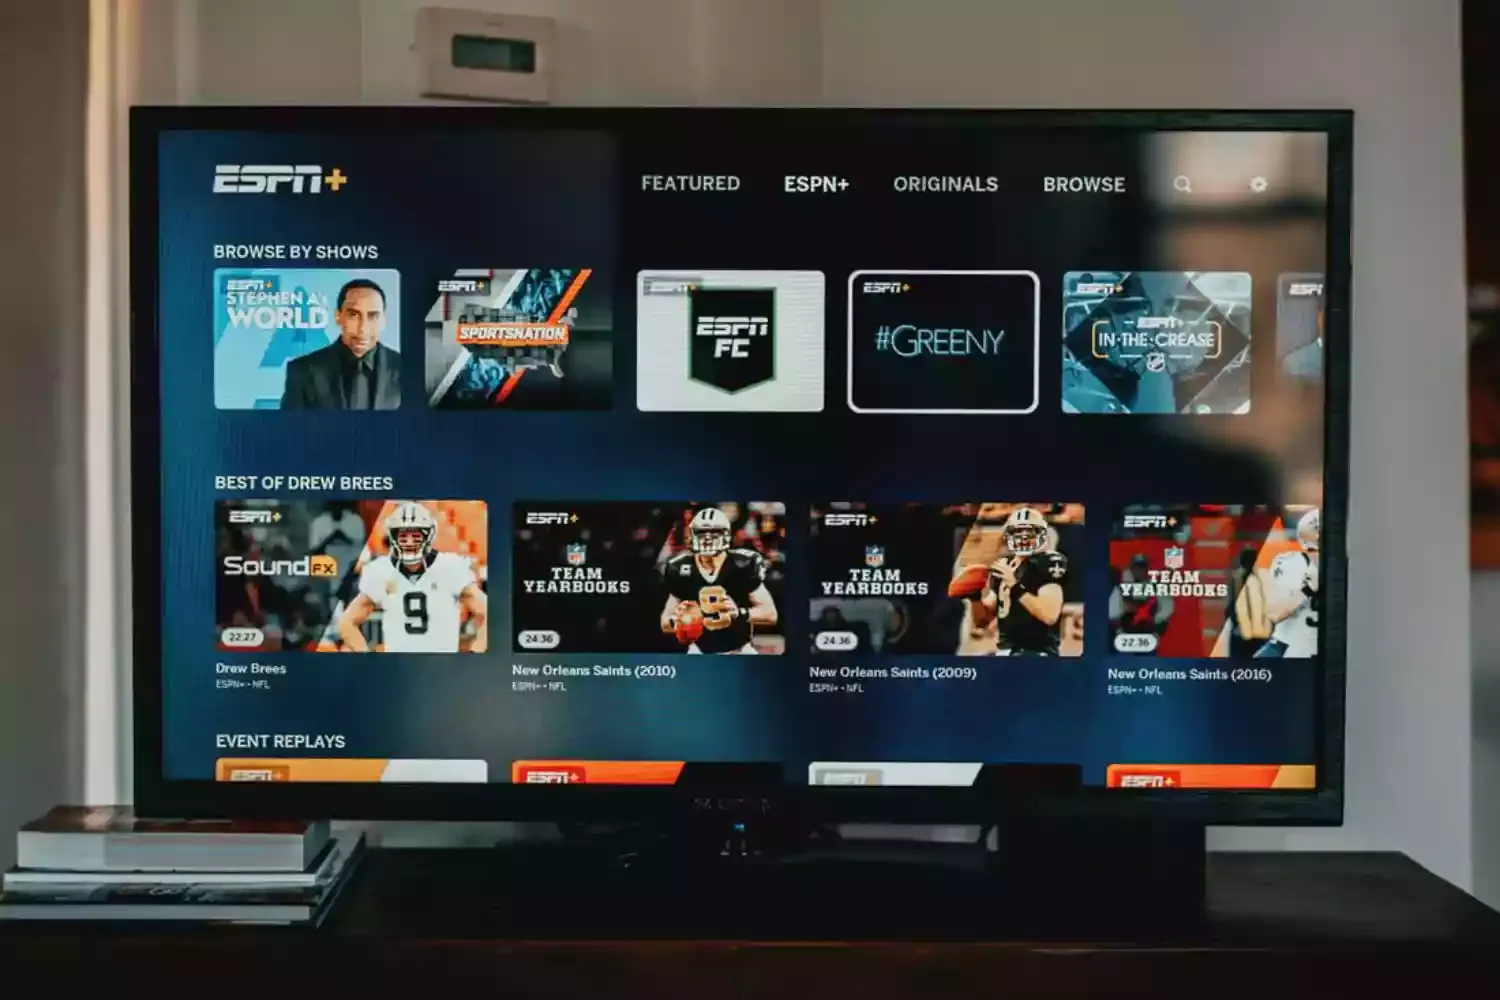 How to set up an Android TV